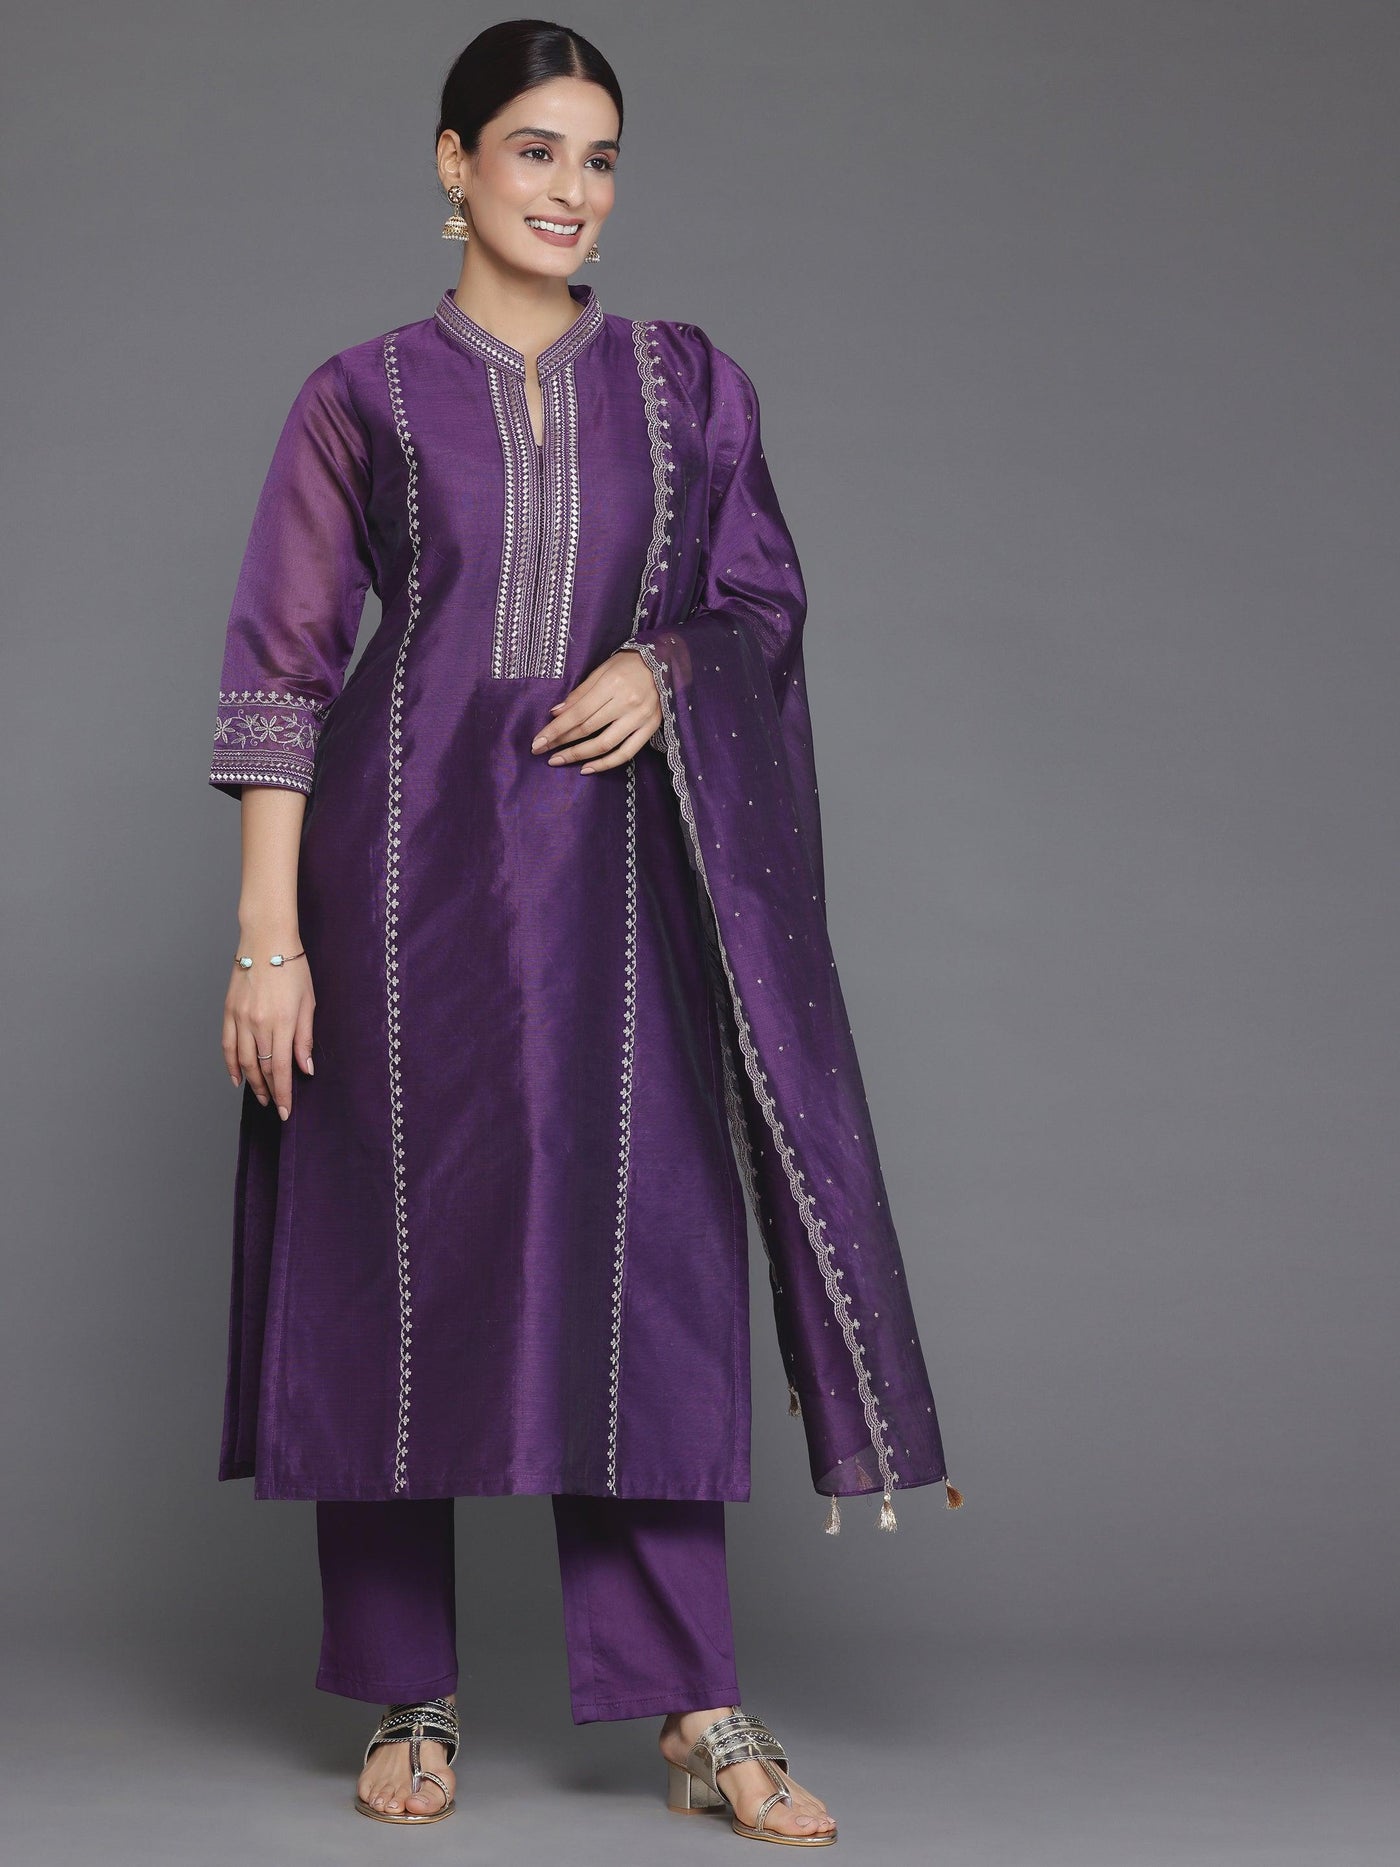 Wine Embroidered Chanderi Silk Straight Suit With Dupatta - Libas